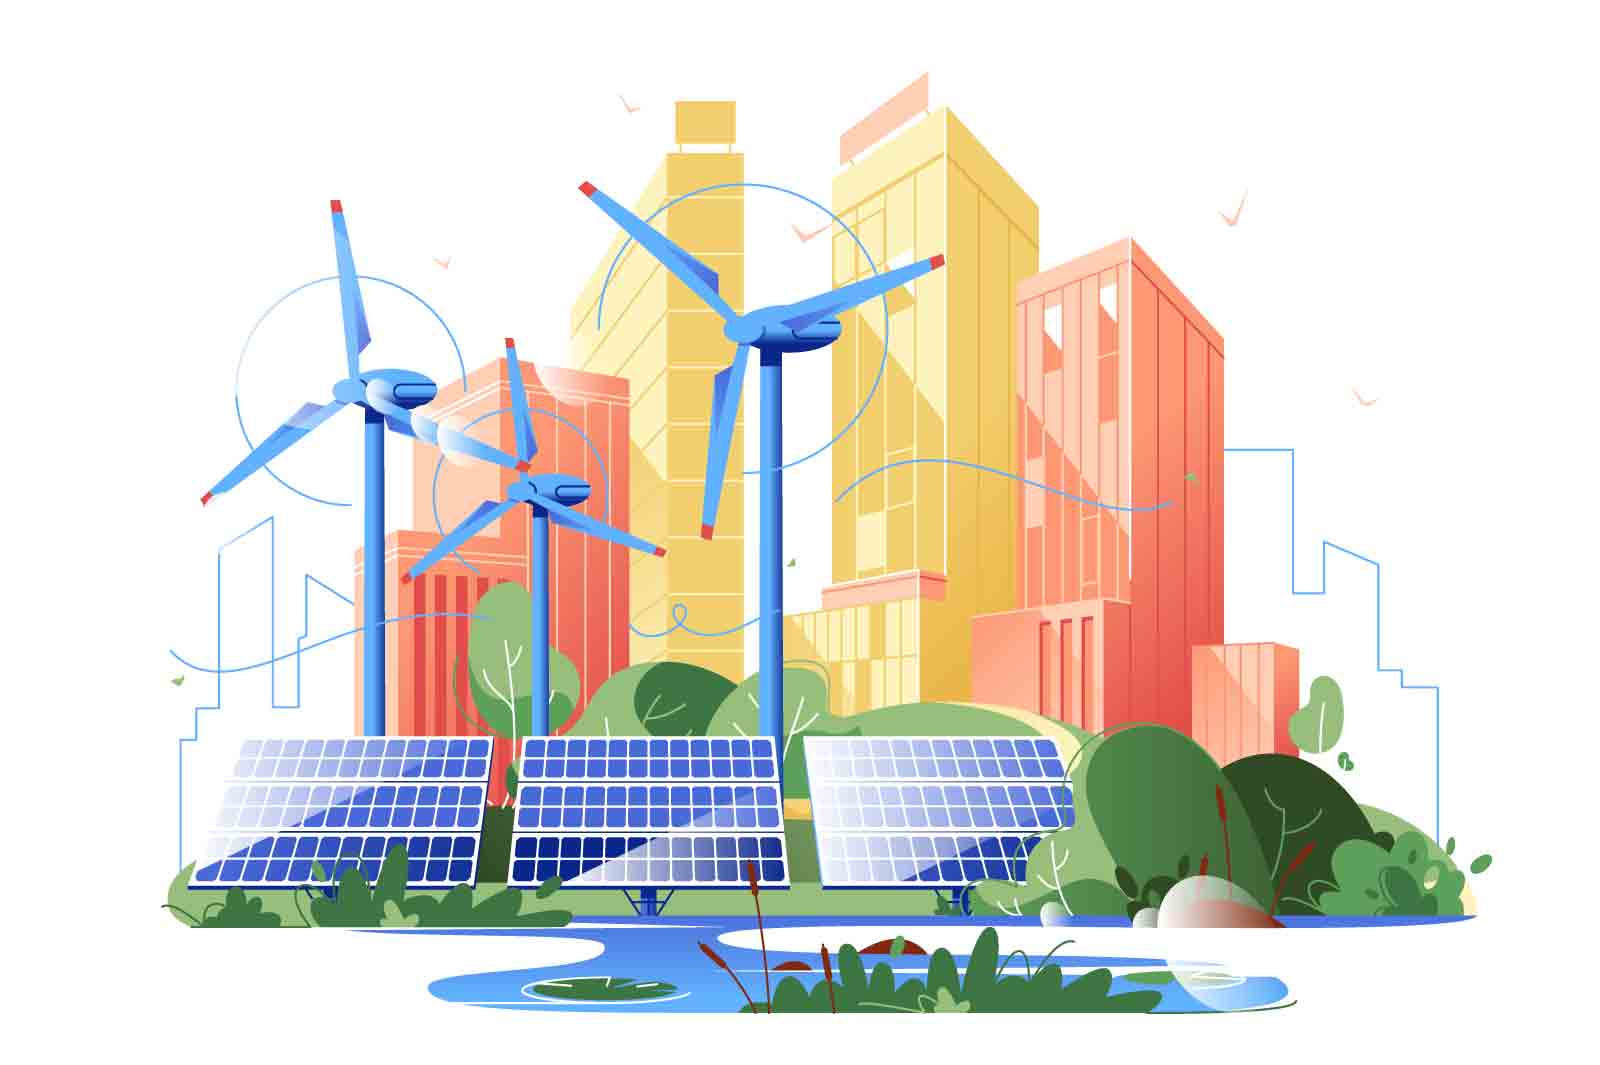 Solar powered city, vector illustration. Green energy concept with skyscrapers and solar panels.